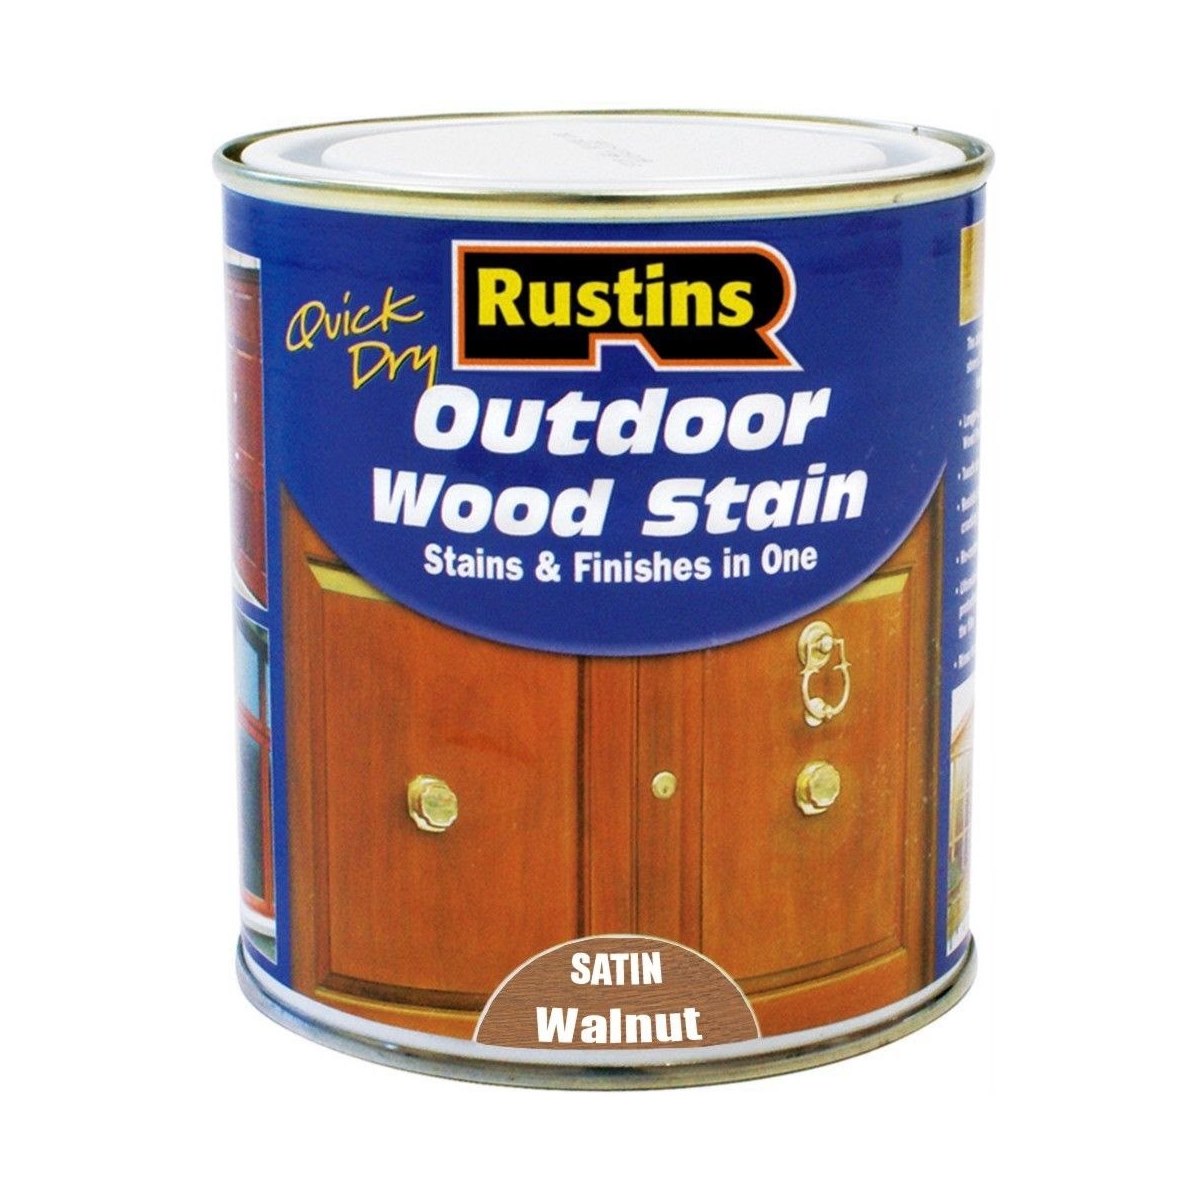 Rustins Quick Dry Outdoor Wood Stain Walnut 1 Litre